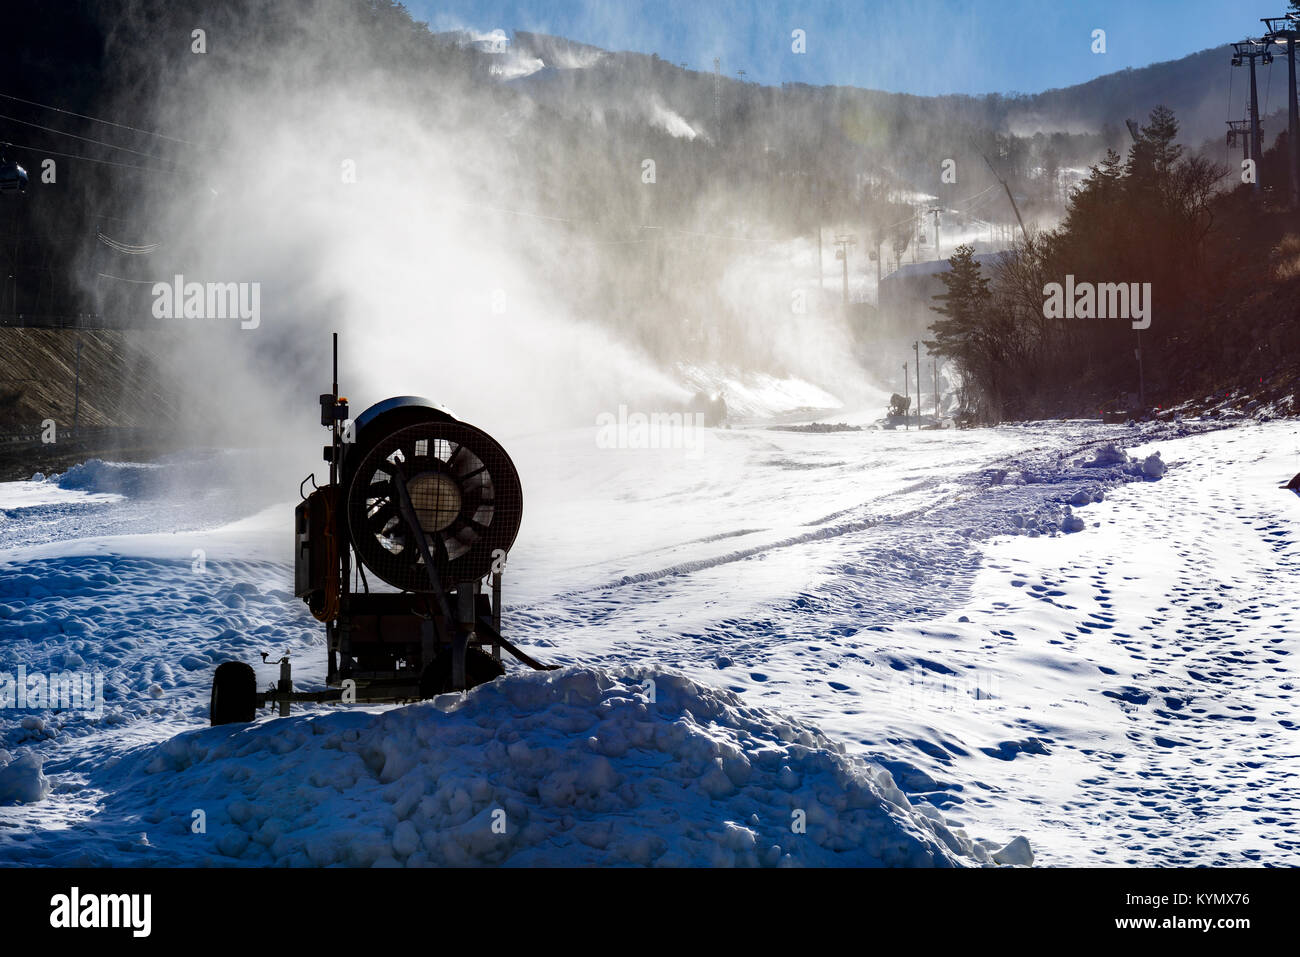 Snow cannons provide snow for preparation of the ski slopes at Jeongseon Alpine Centre, Jeongseon-gun, Gangwon-do winter olympic and paralympic games Stock Photo